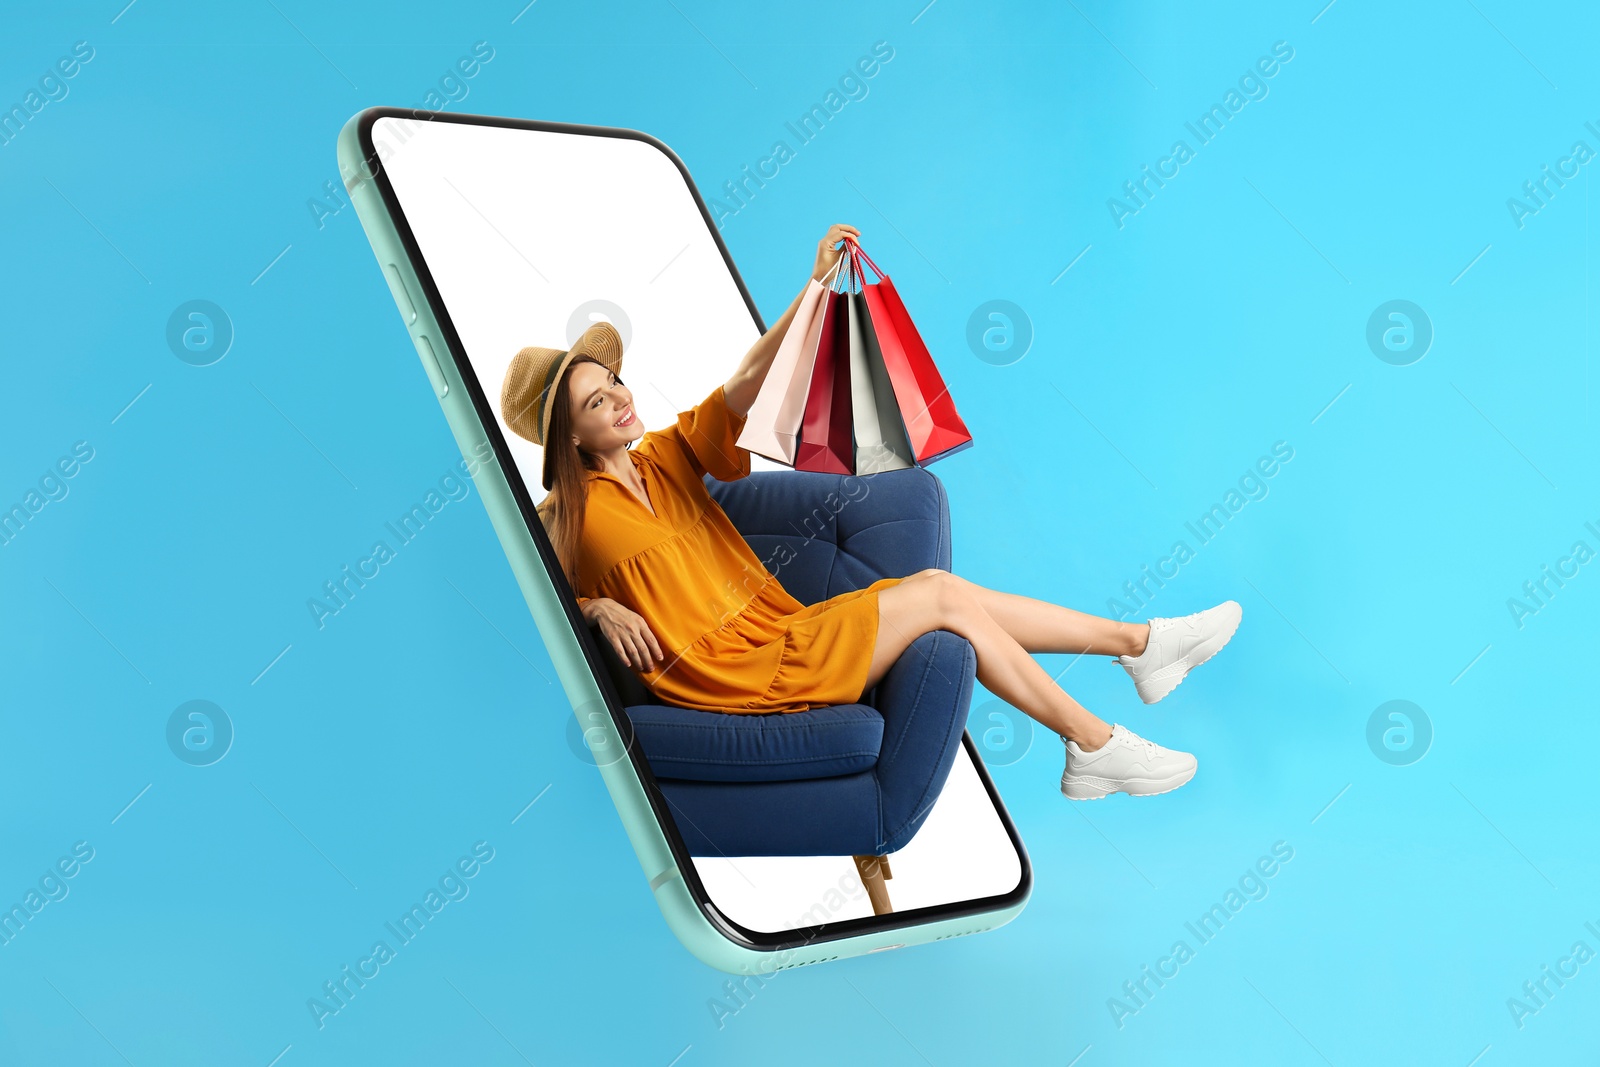 Image of Online shopping. Happy woman with paper bags in armchair looking out from smartphone on light blue background